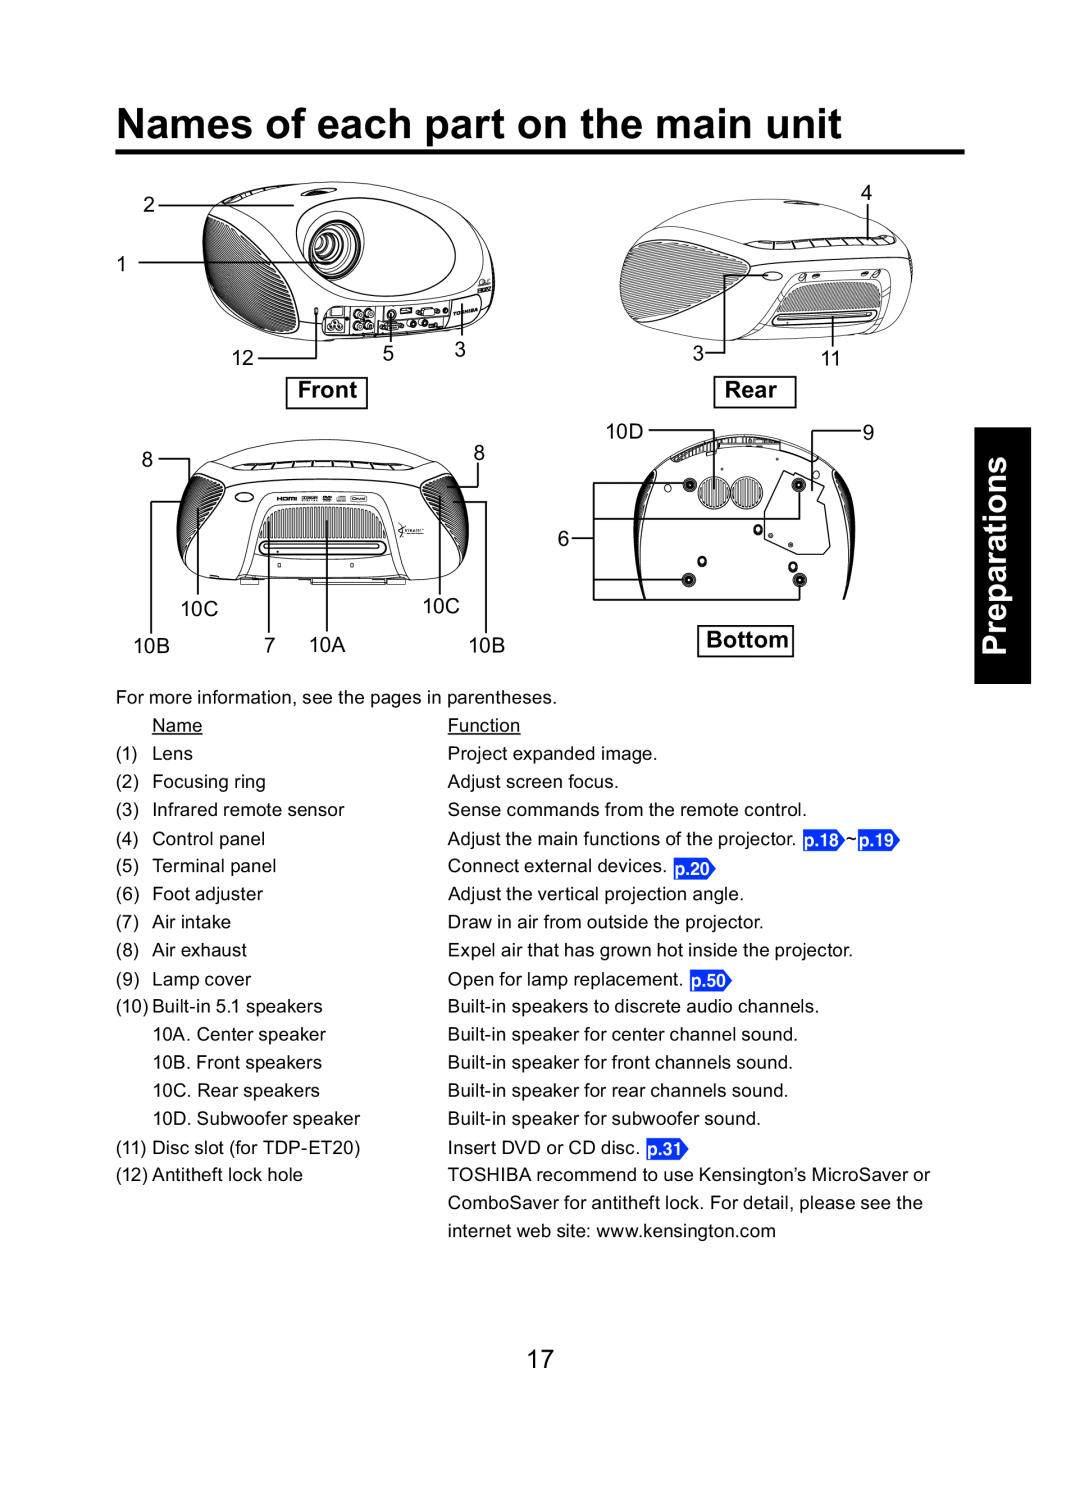 Toshiba TDP-ET10 owner manual Names of each part on the main unit, Preparations, Front, Rear, Bottom 